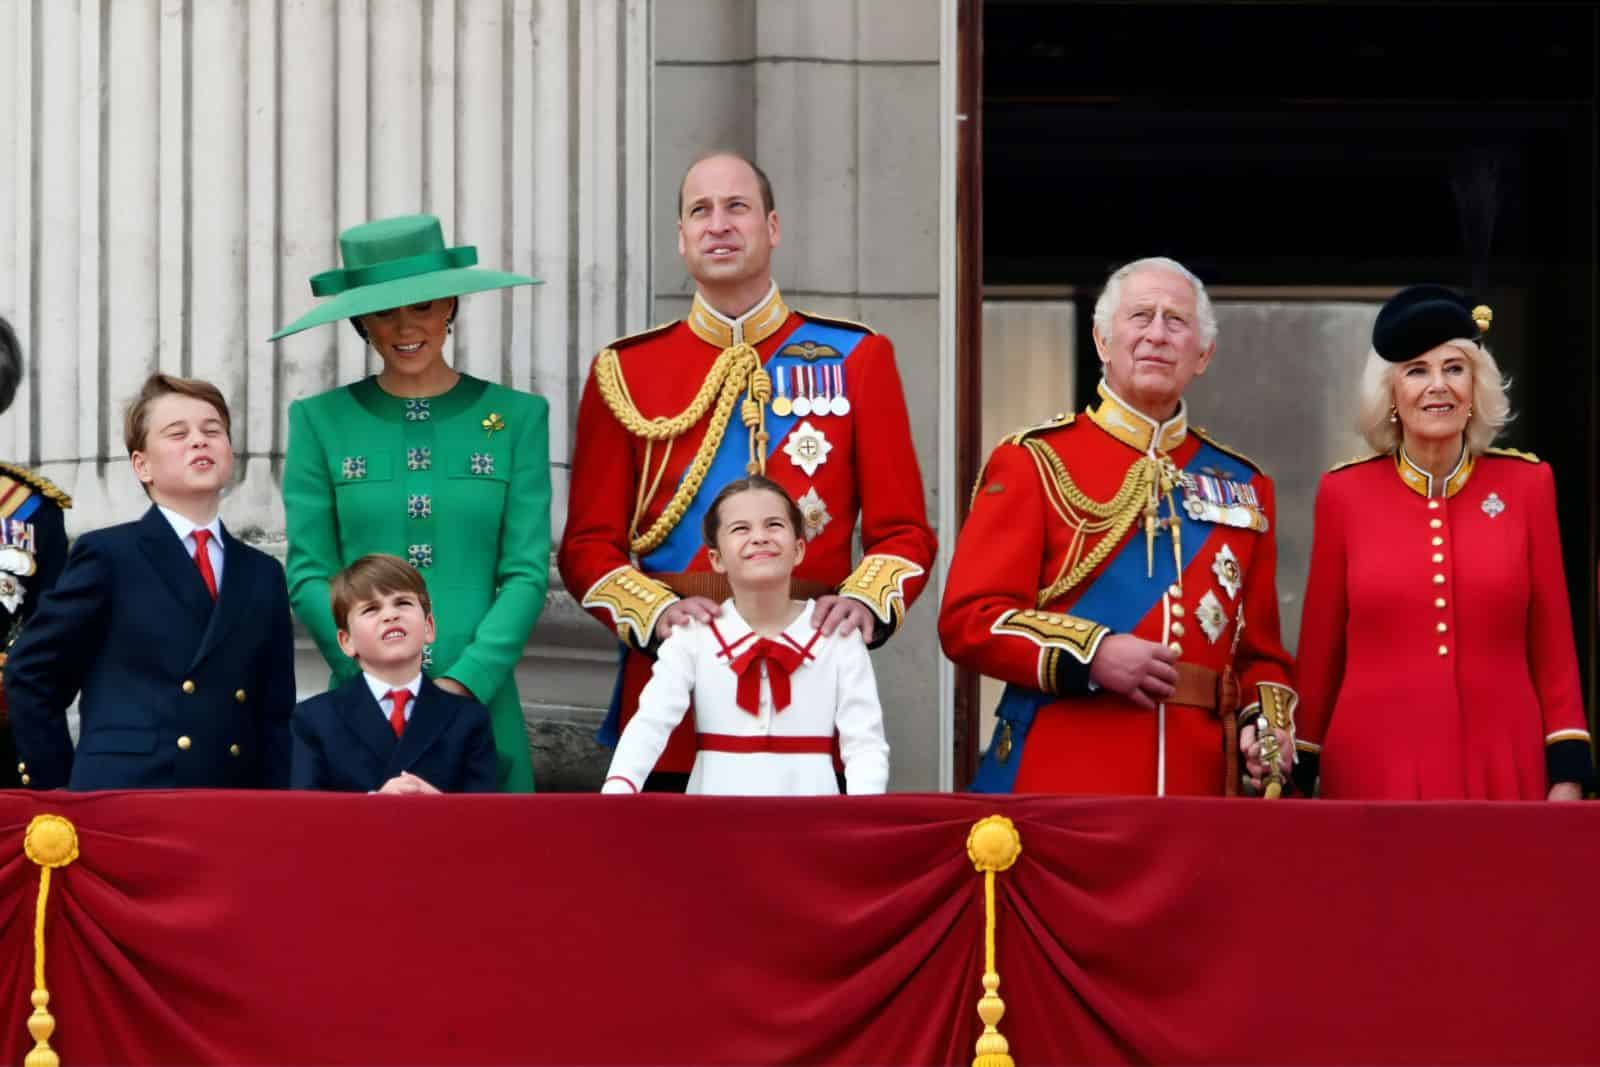 Image Credit: Shutterstock / Pete Hancock <p><span>Controversial to some, beloved by others, the Royal Family is undeniably woven into the fabric of our national story.</span></p>